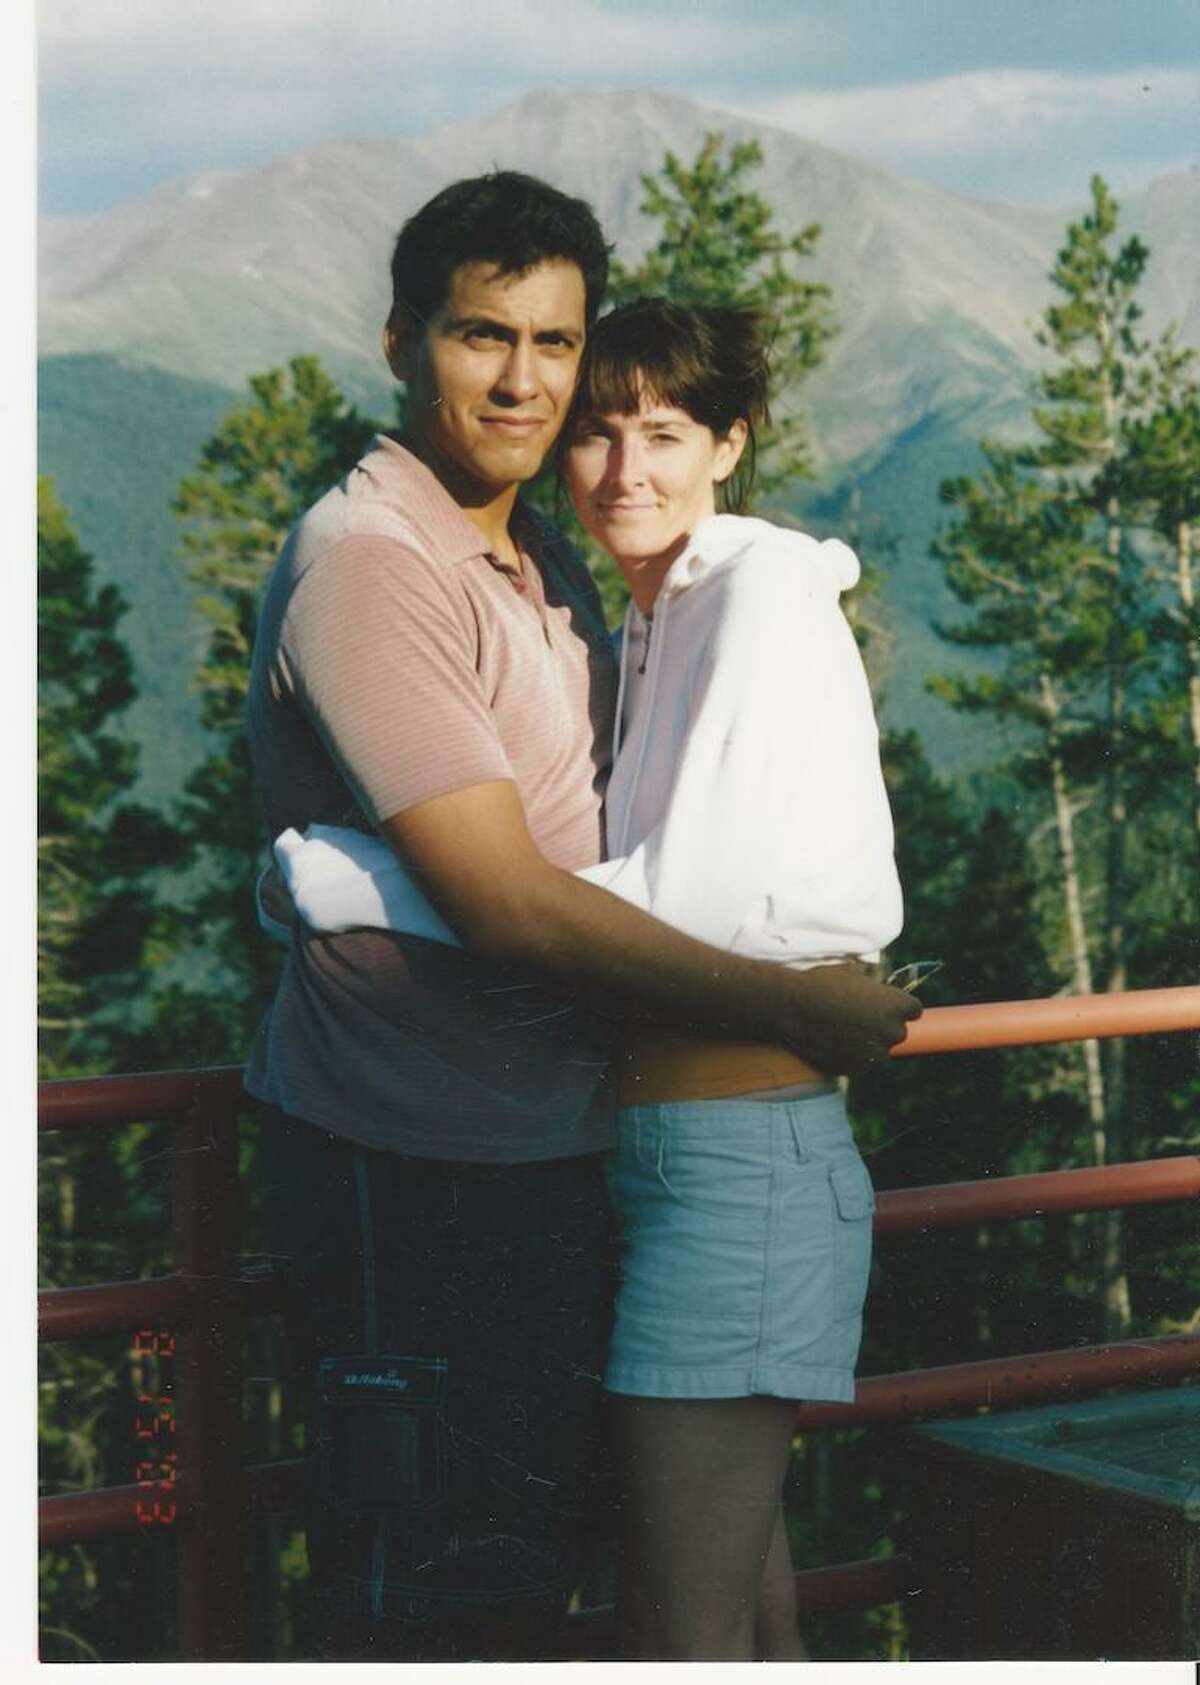 “Mystery on the Rooftop,” the first story of the new “Unsolved Mysteries” series, Allison Rivera, left, poses with her husband, Rey Rivera, before his suspicious death.